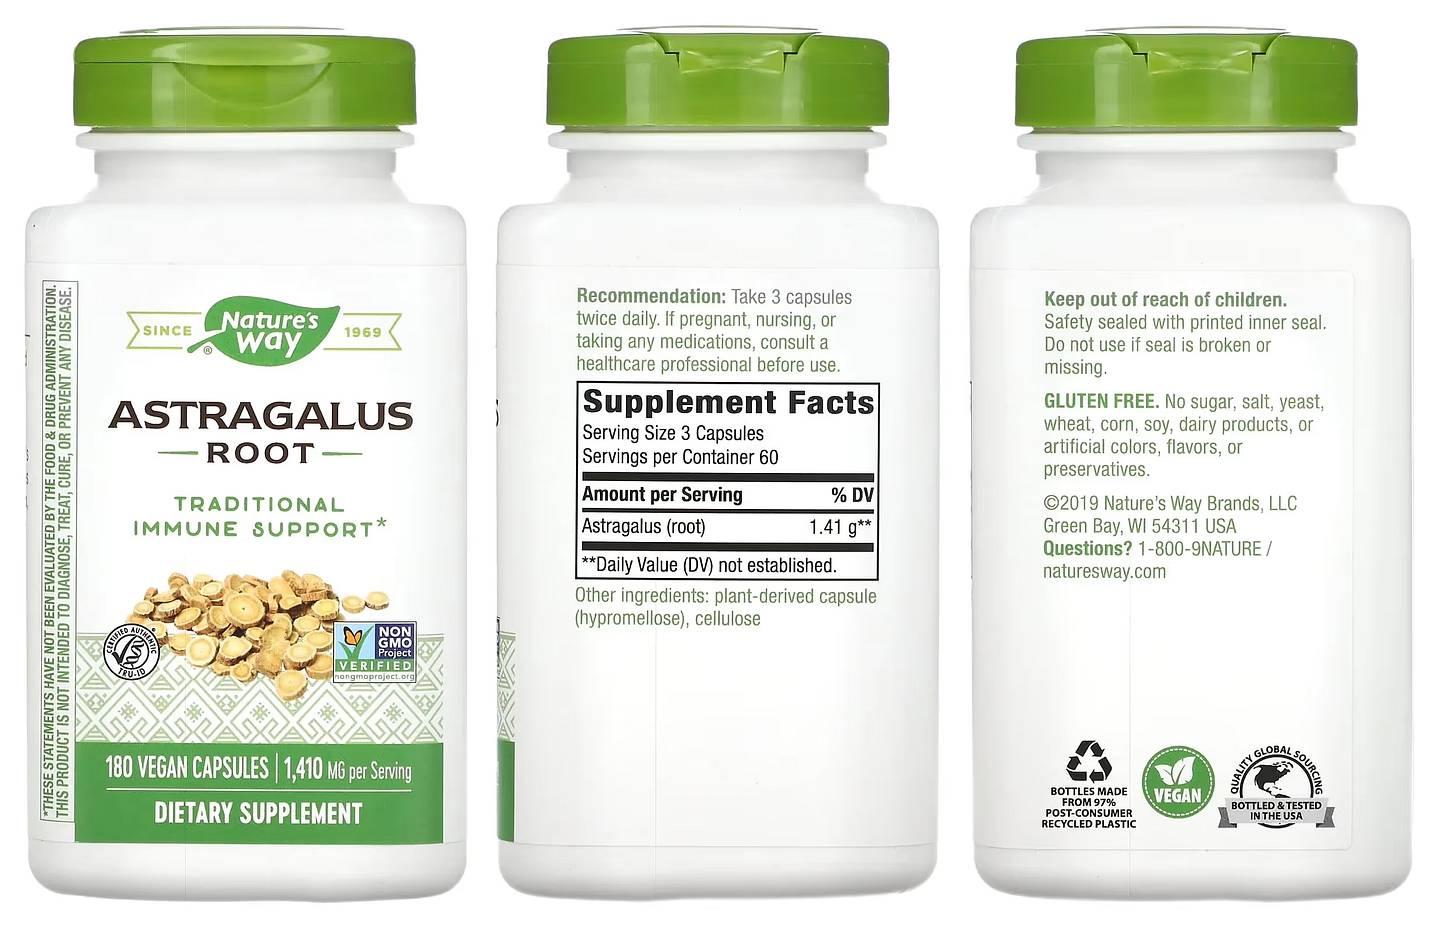 Nature's Way, Astragalus Root packaging